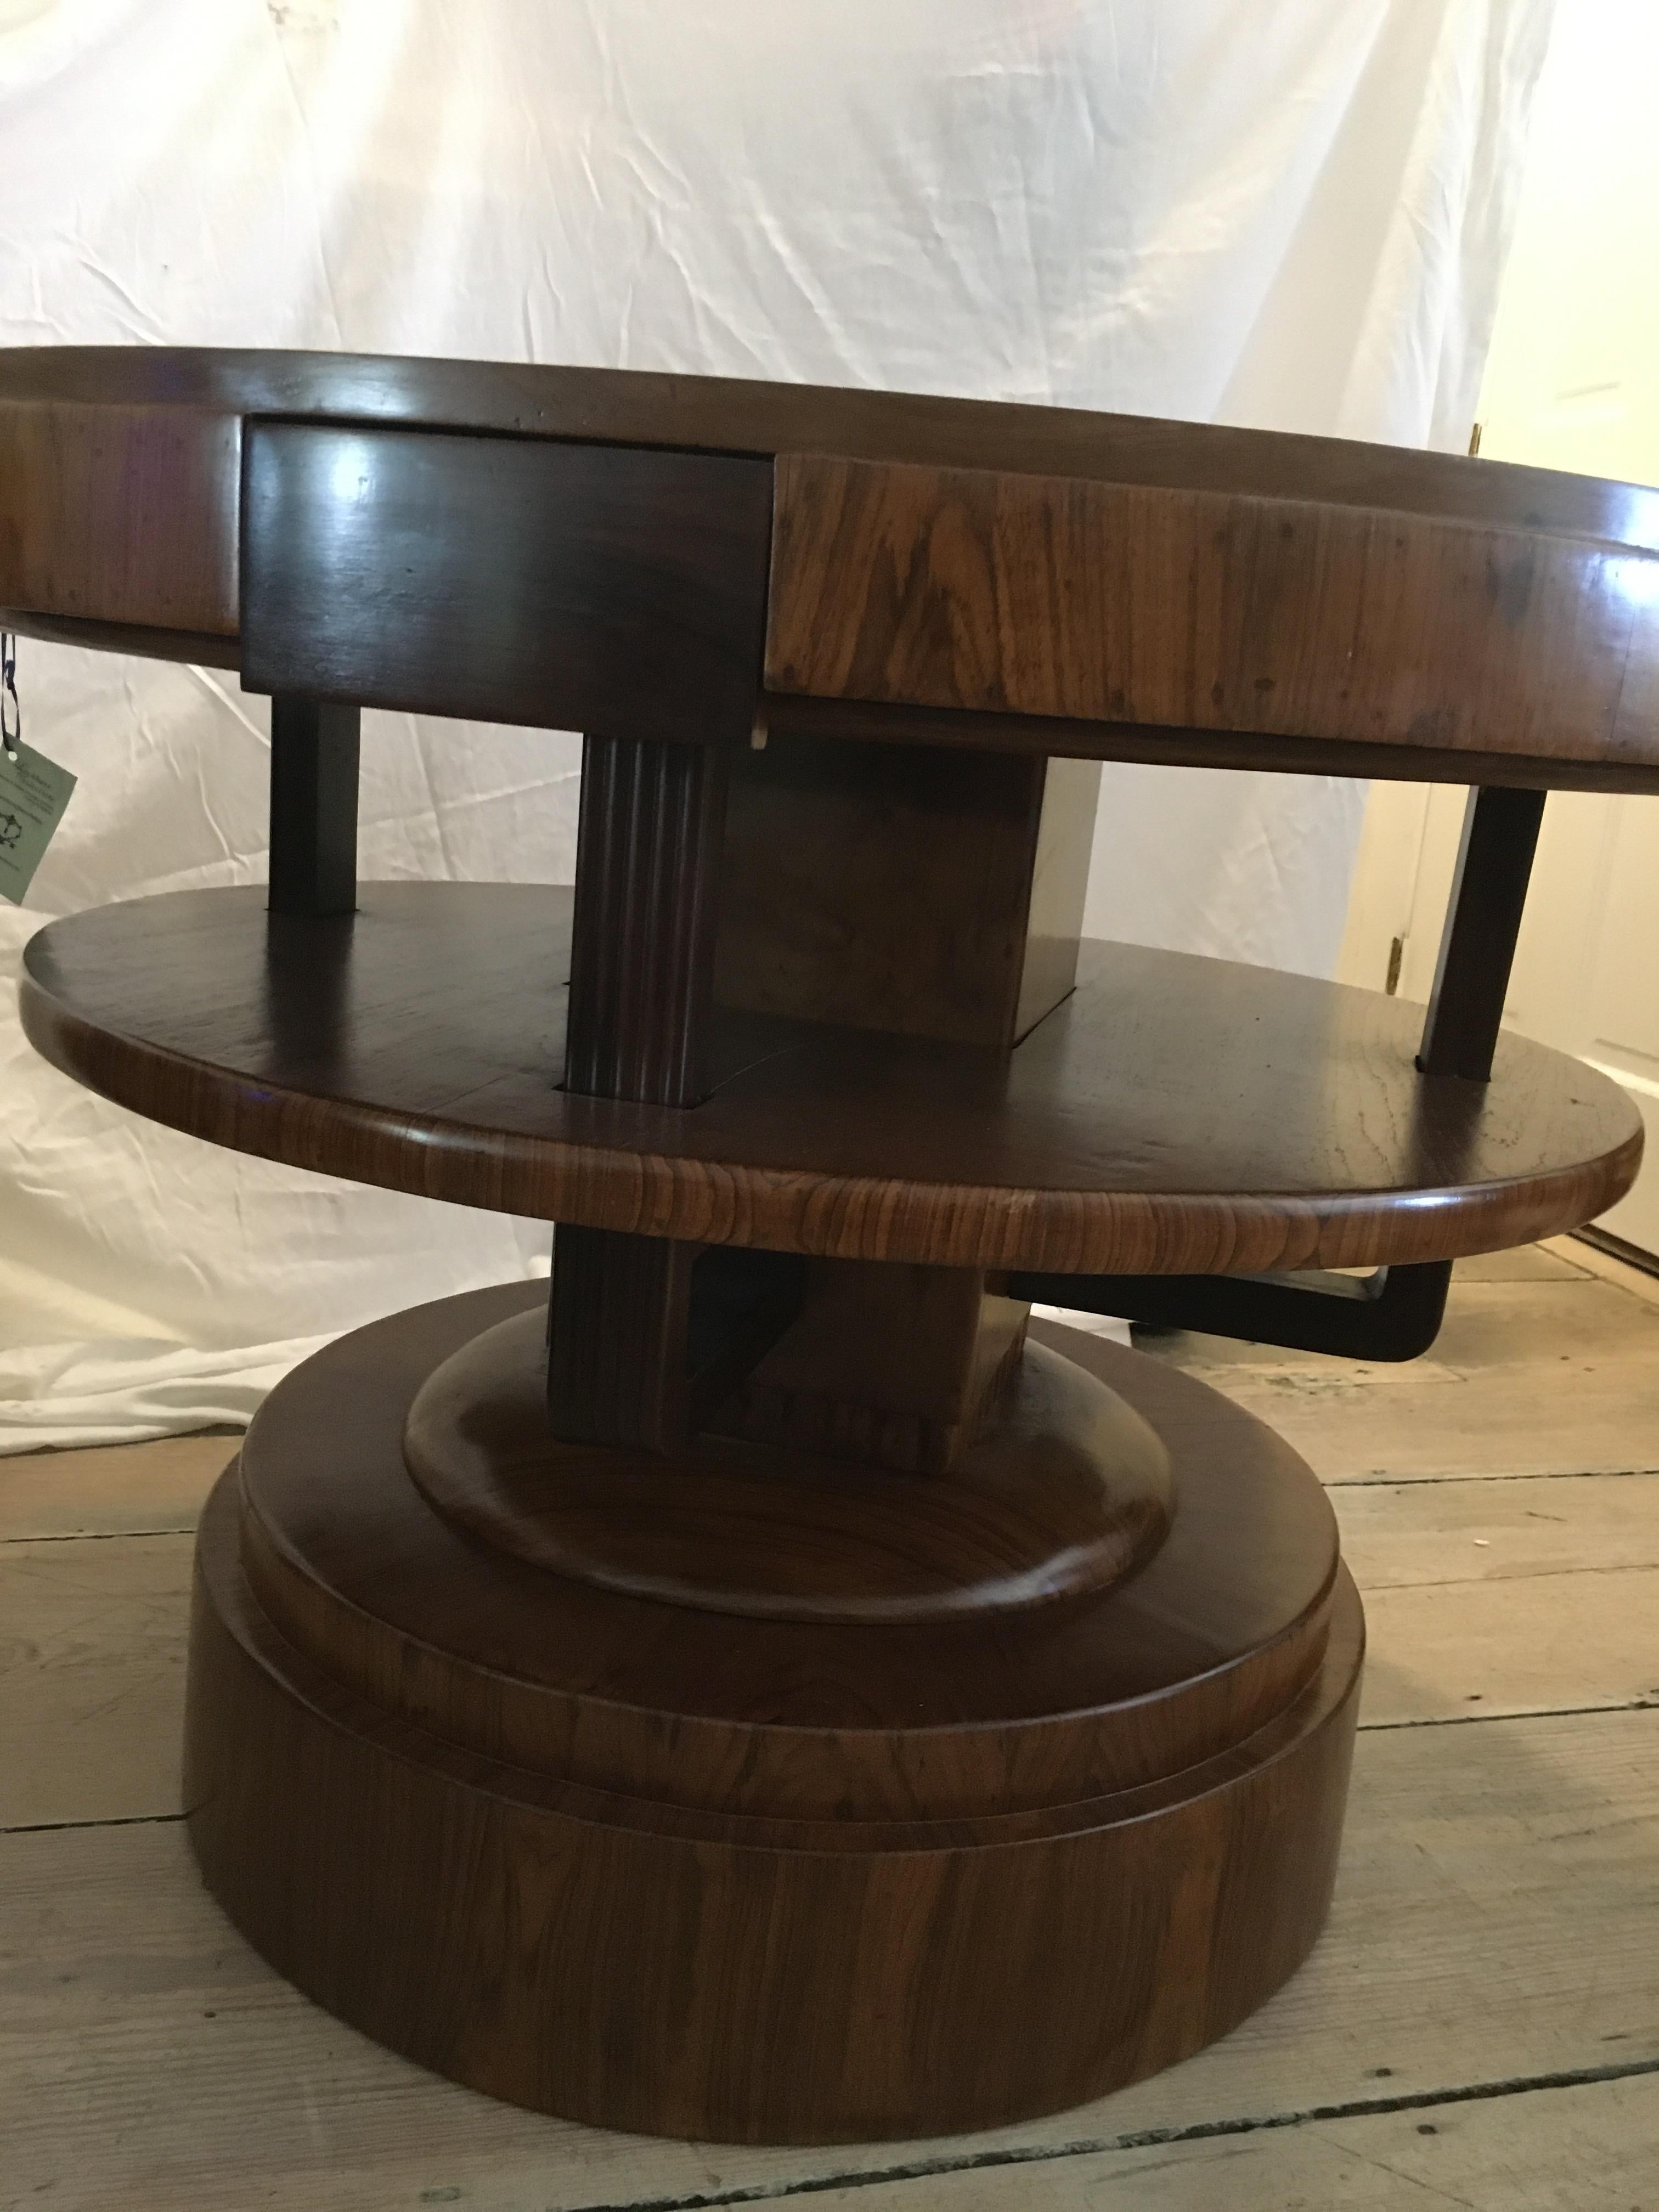 20th Century Art Deco Teak Center or Dining Table with Rosewood Accents